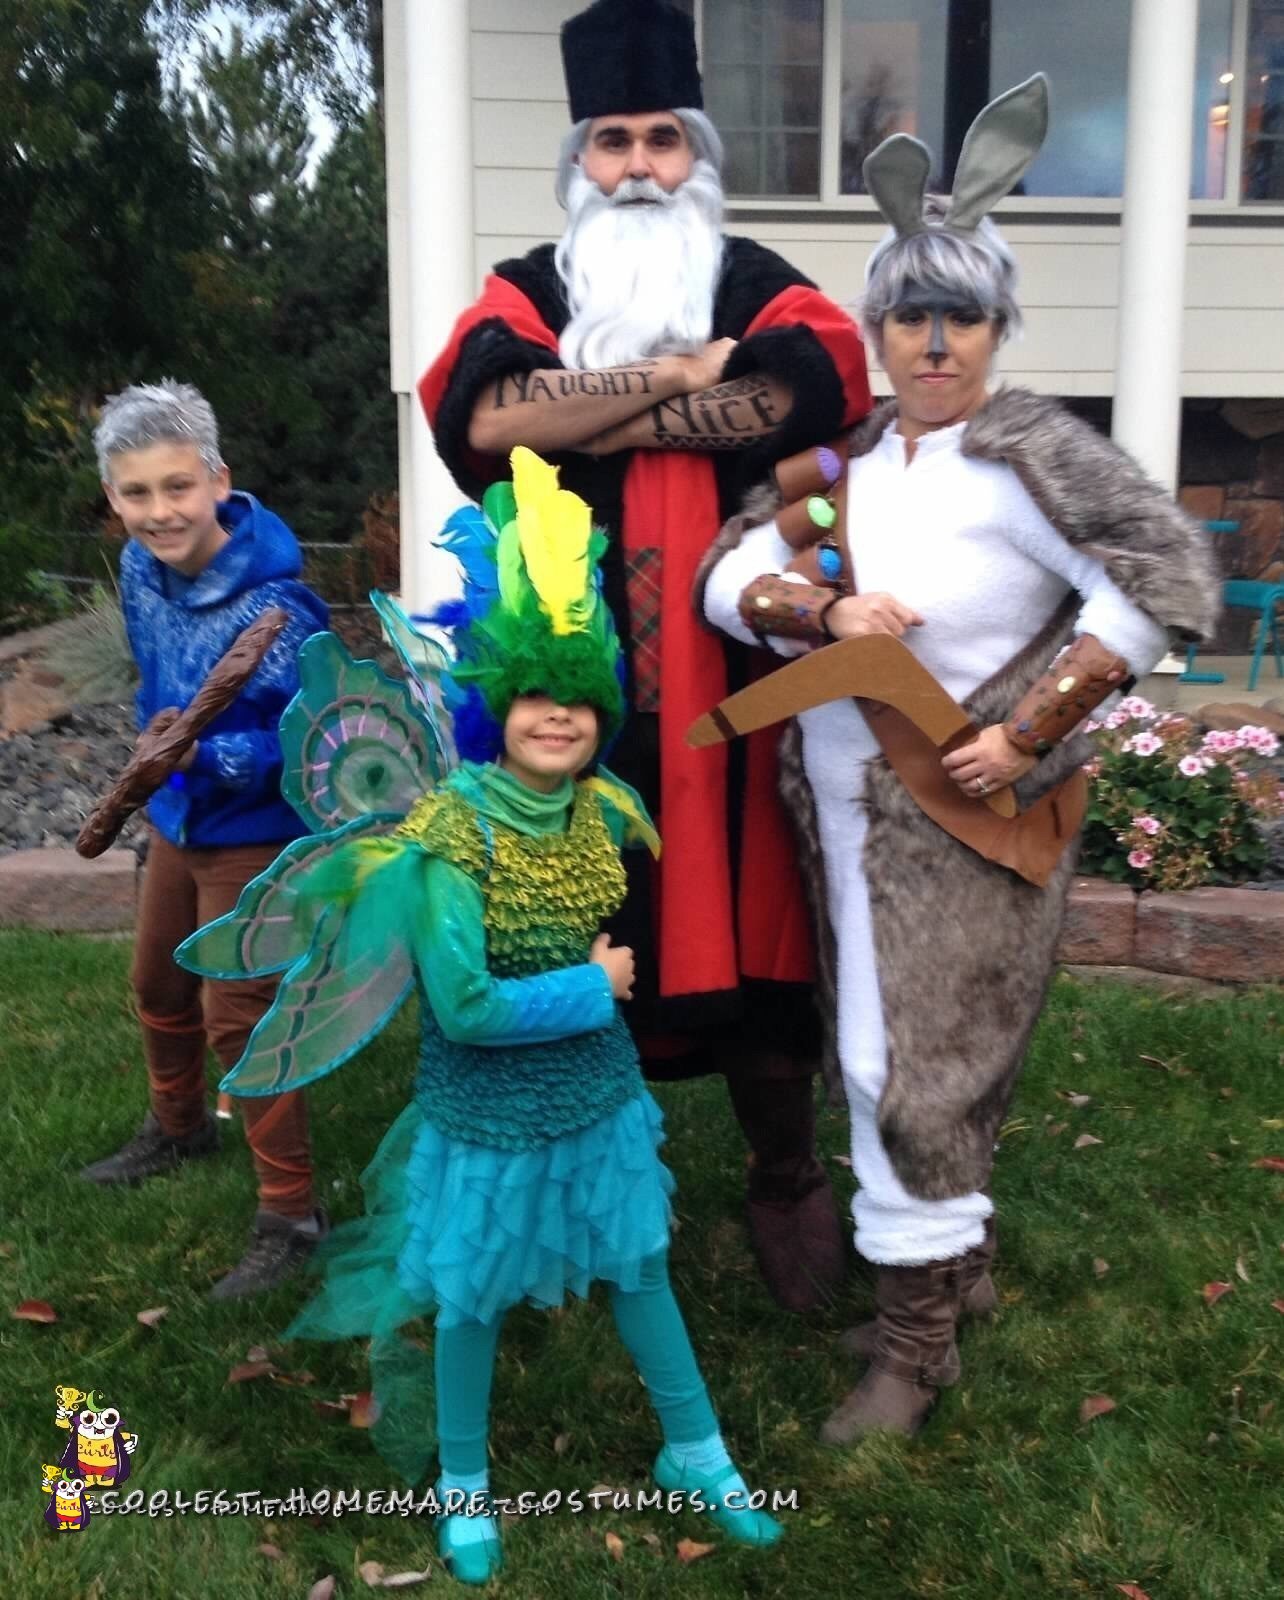 Cool Family Costume - Rise of the Guardians